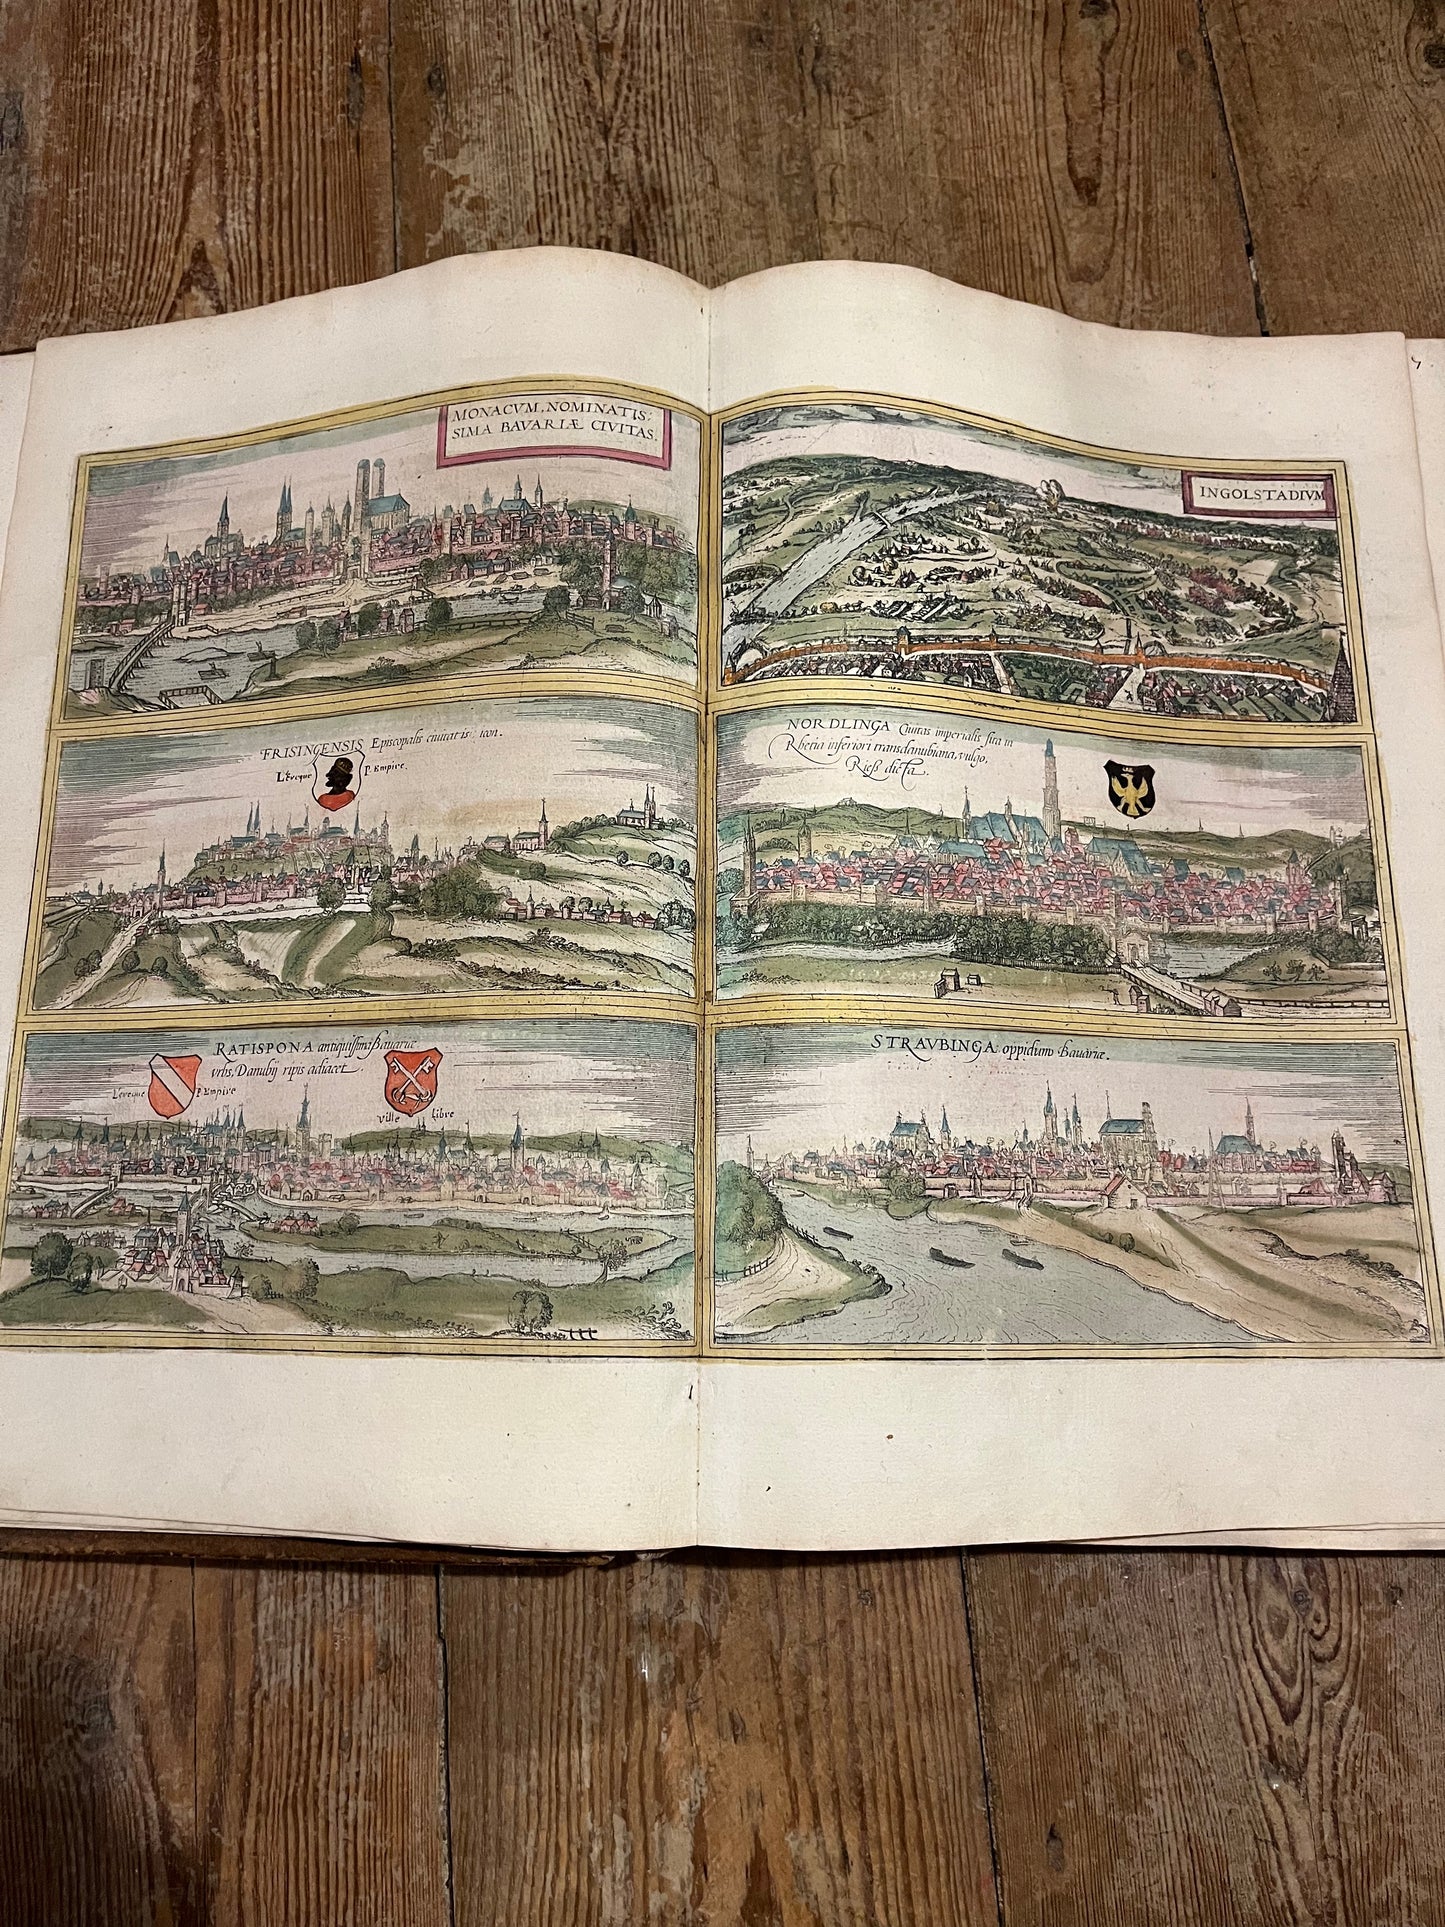 Rare large fragment of Braun and Hogenberg’s famous “Civitates Orbis Terrarum” - “Cities of the world”